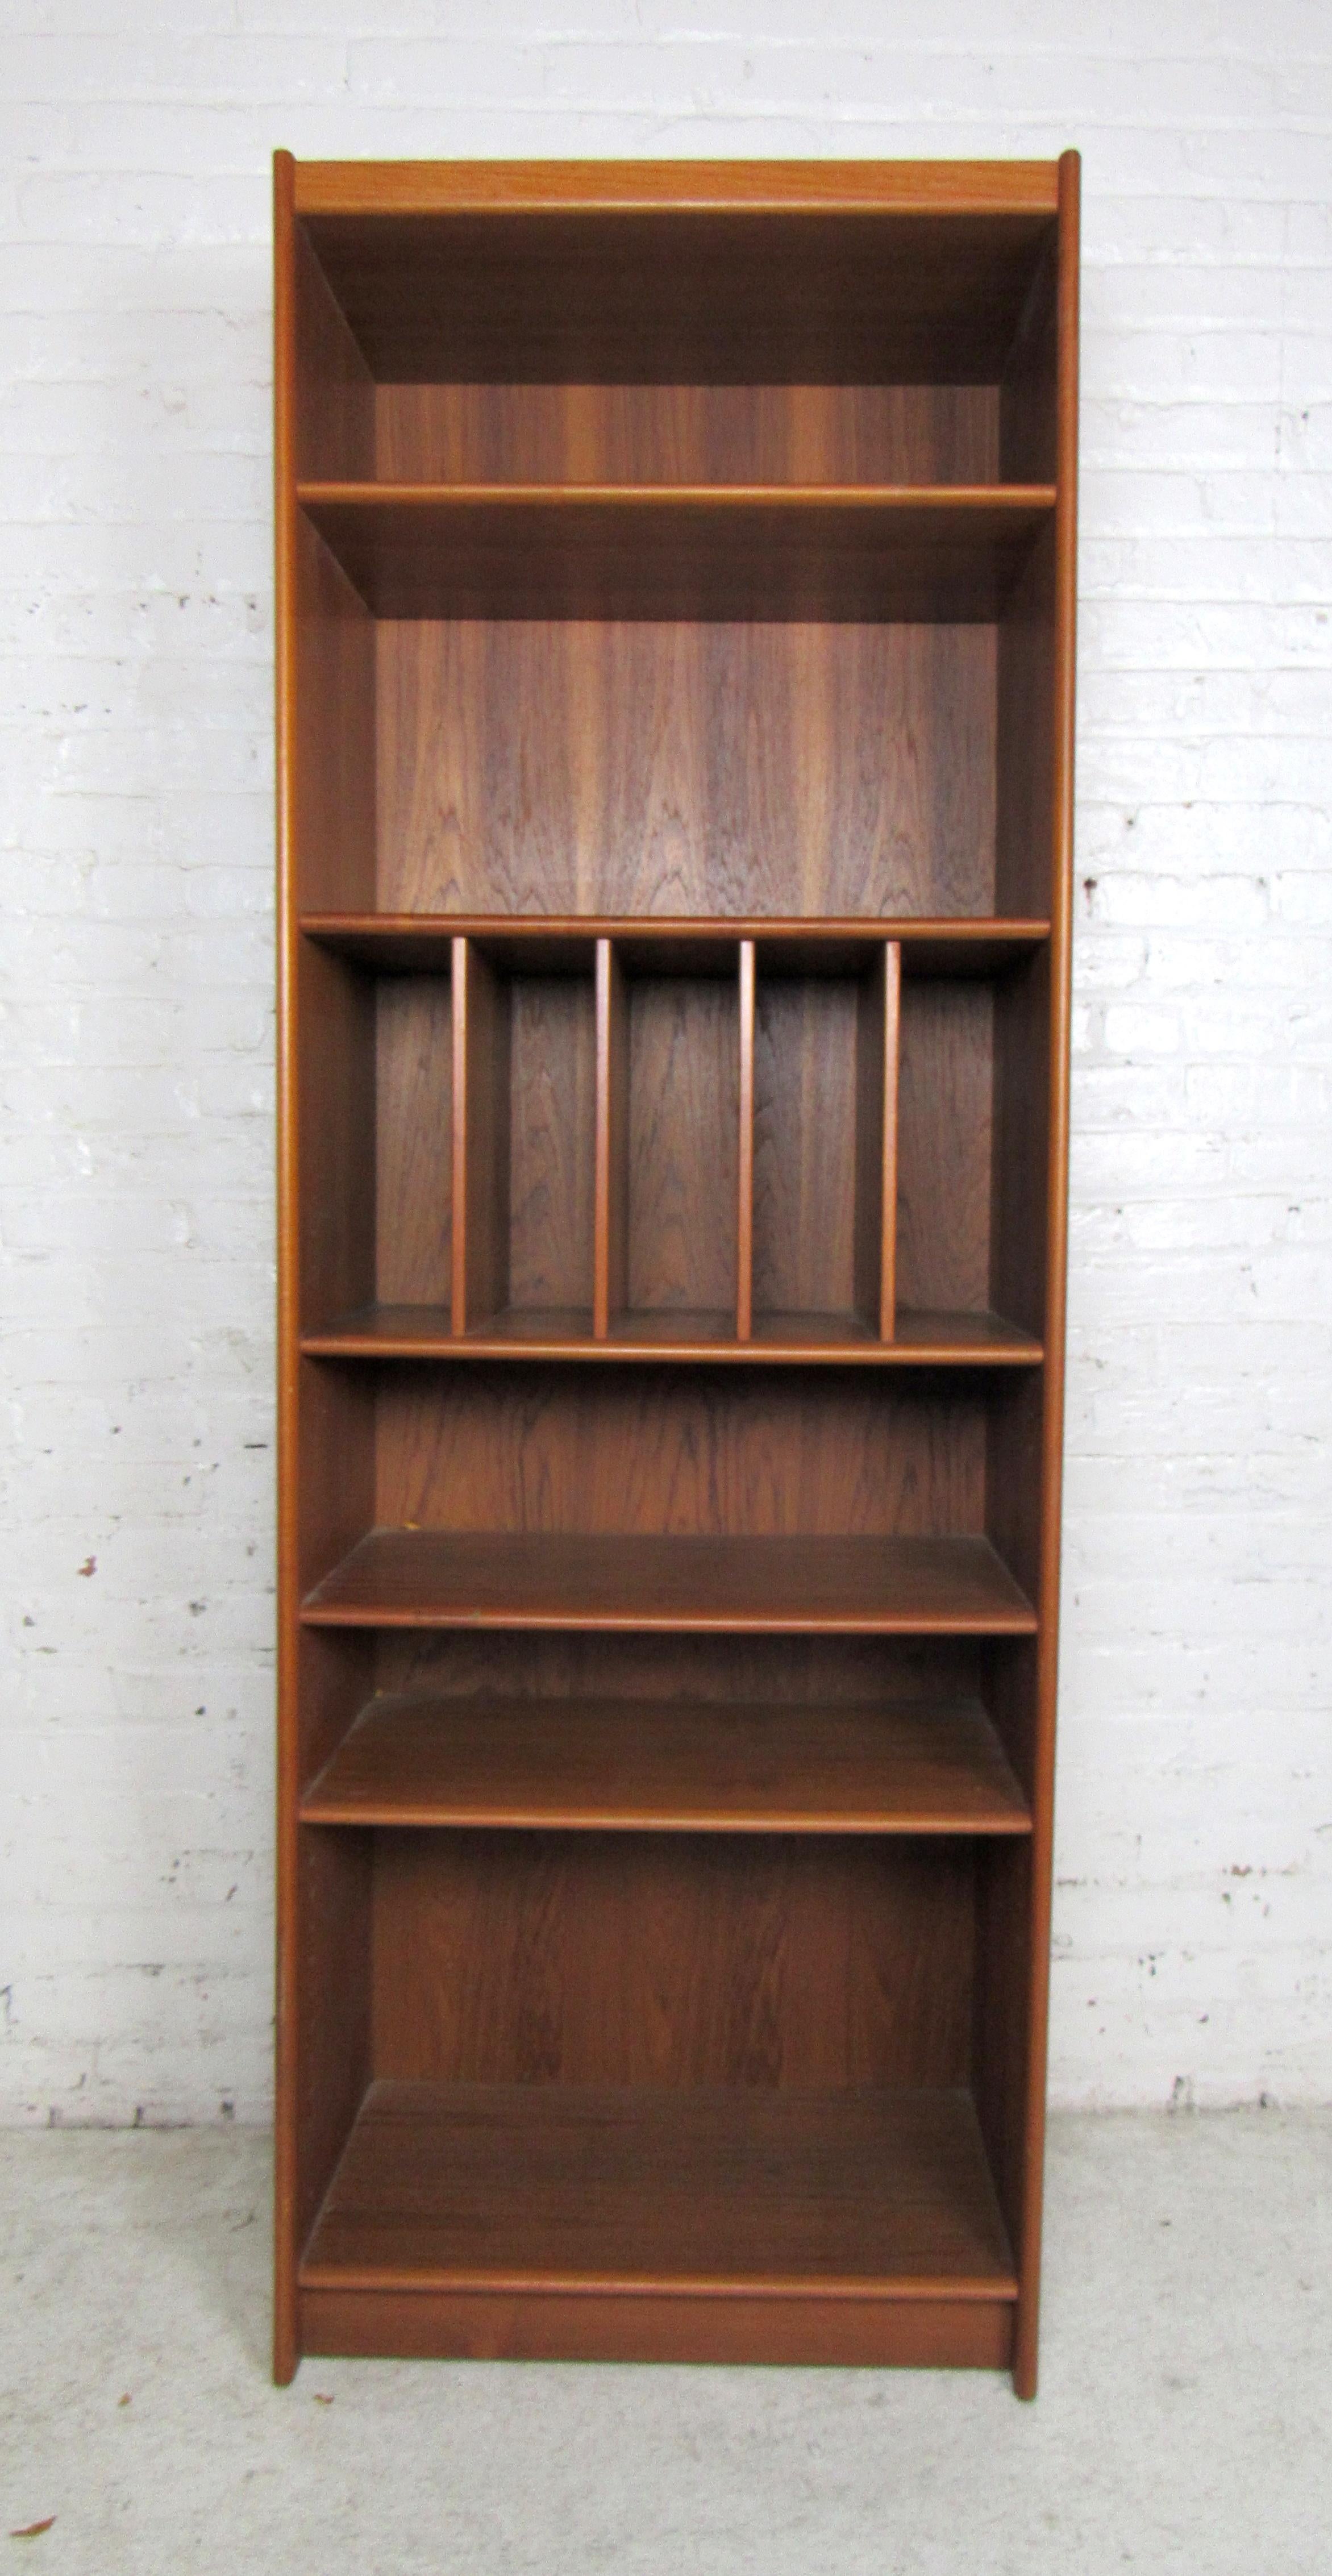 Vintage modern bookcase featured in rich teak wood grain and veneer.
The center section has great storage for records or documents.

Please confirm item location (NY or NJ).